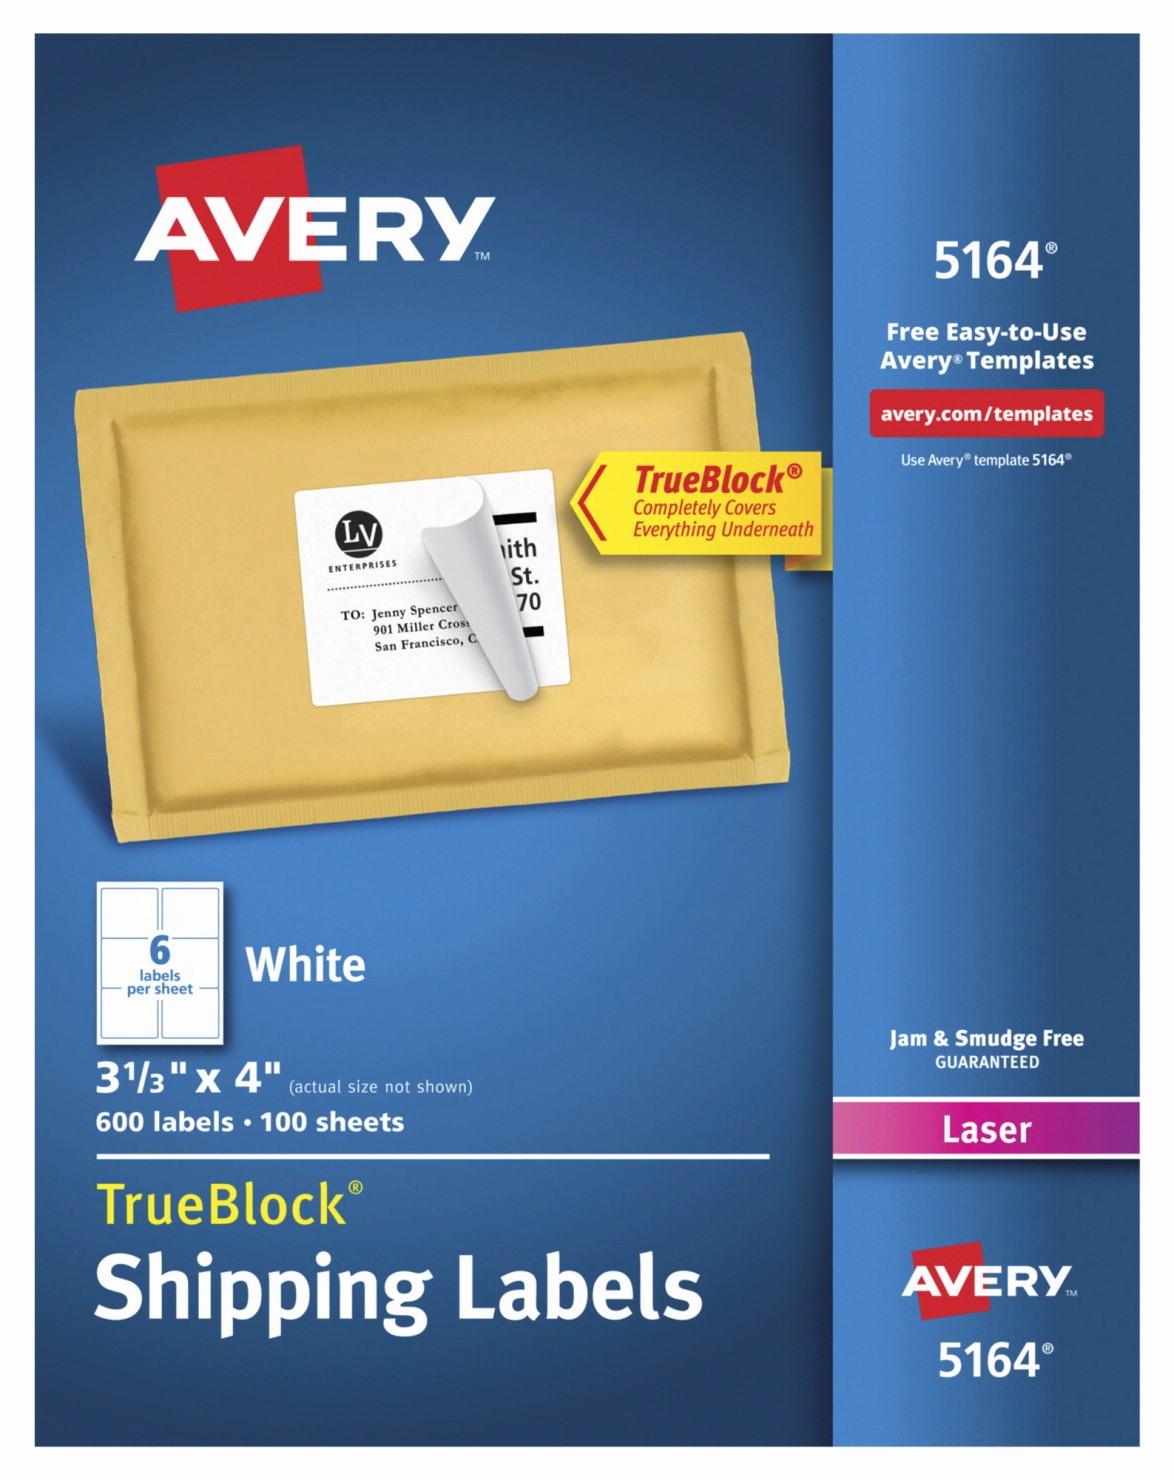 Avery 5164 Shipping Label Template Inspirational Avery Permanent Adhesive Shipping Labels White School